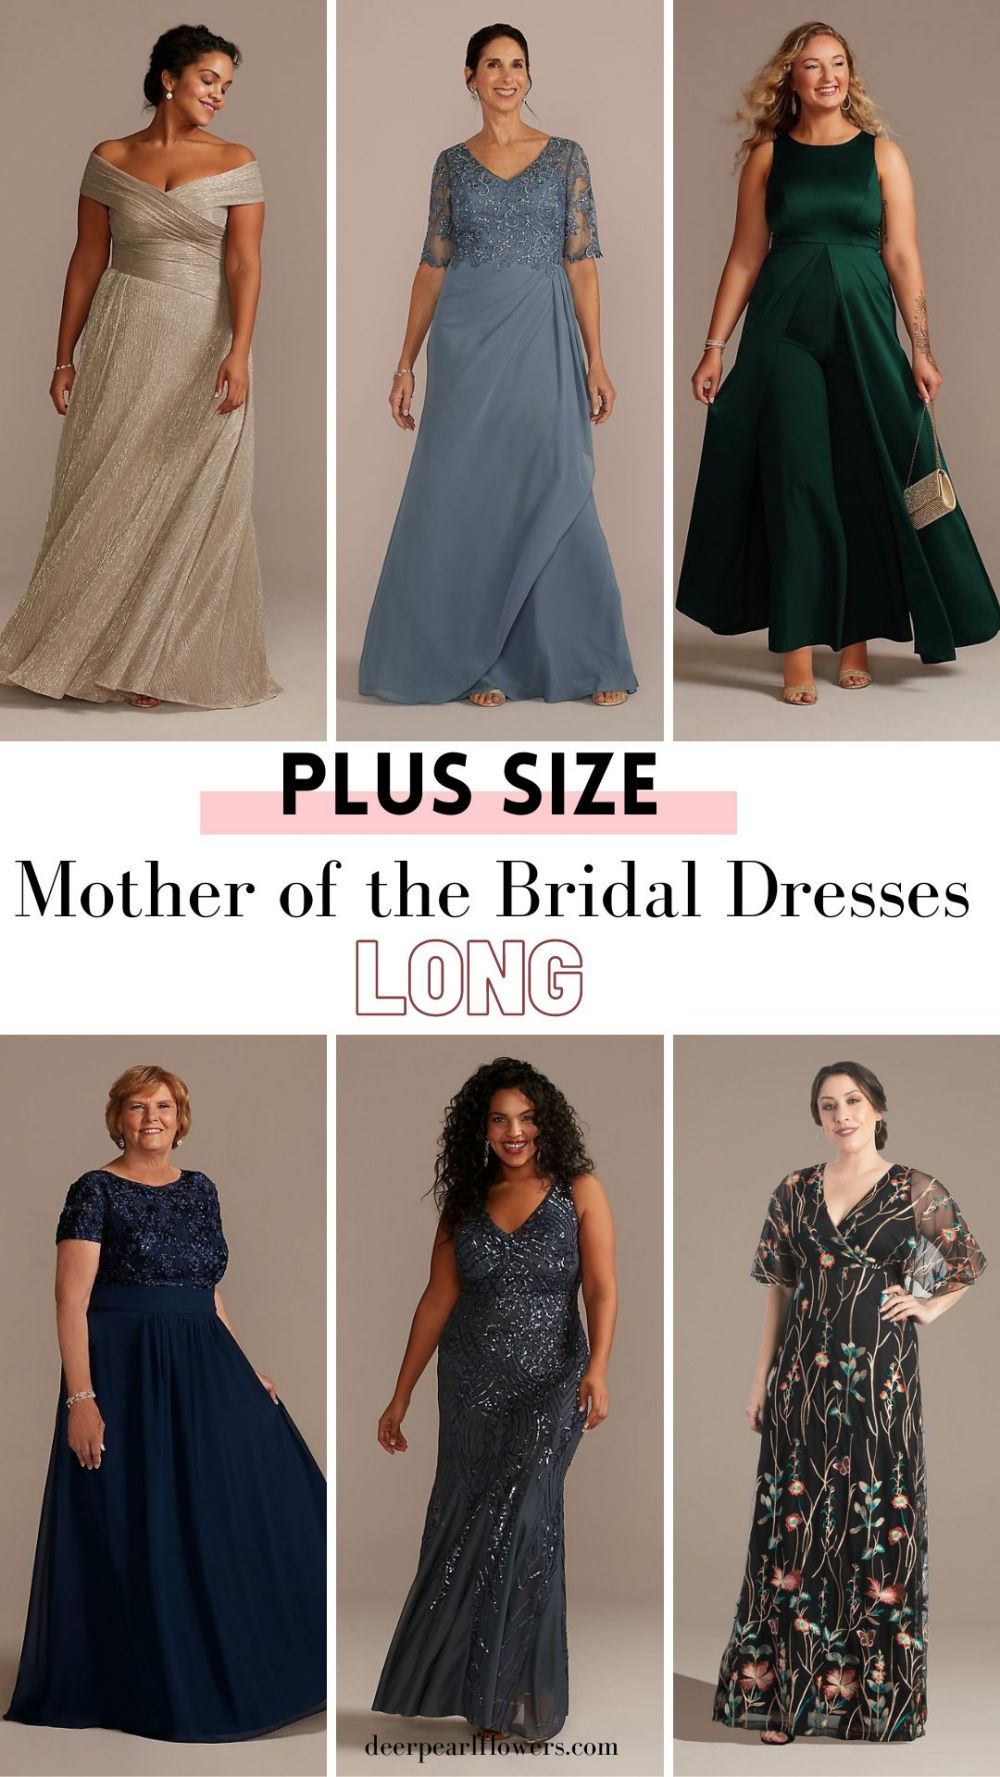 long plus size mother of the bridal dresses